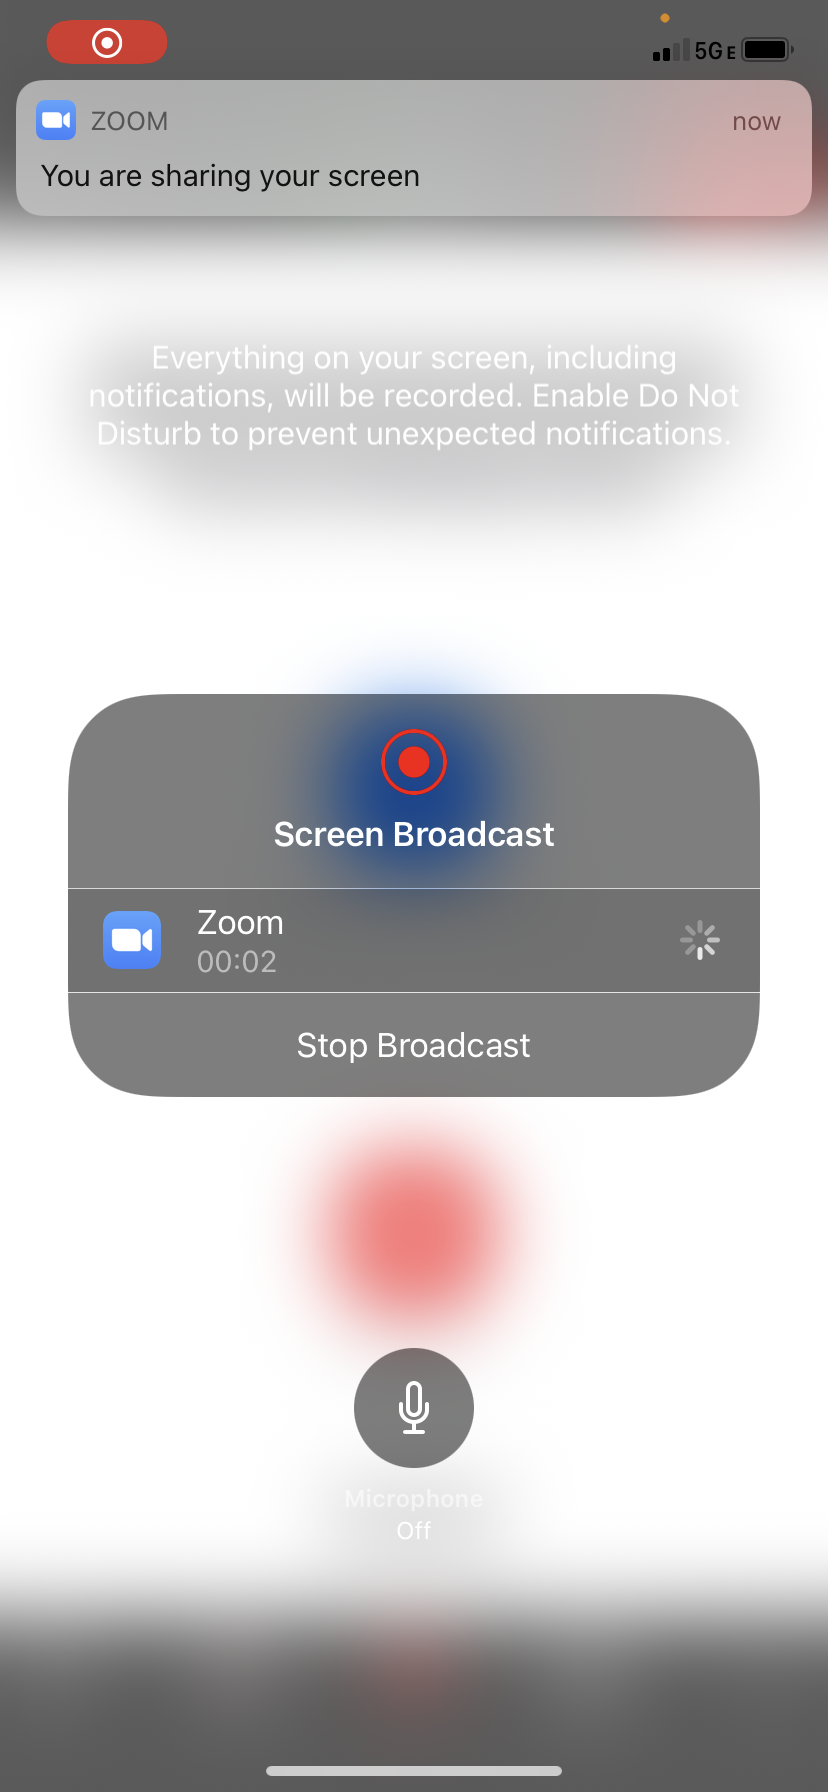 Screenshot of an iPhone starting screen broadcast. There is a red icon on the top left corner to indicate you are sharing your screen.